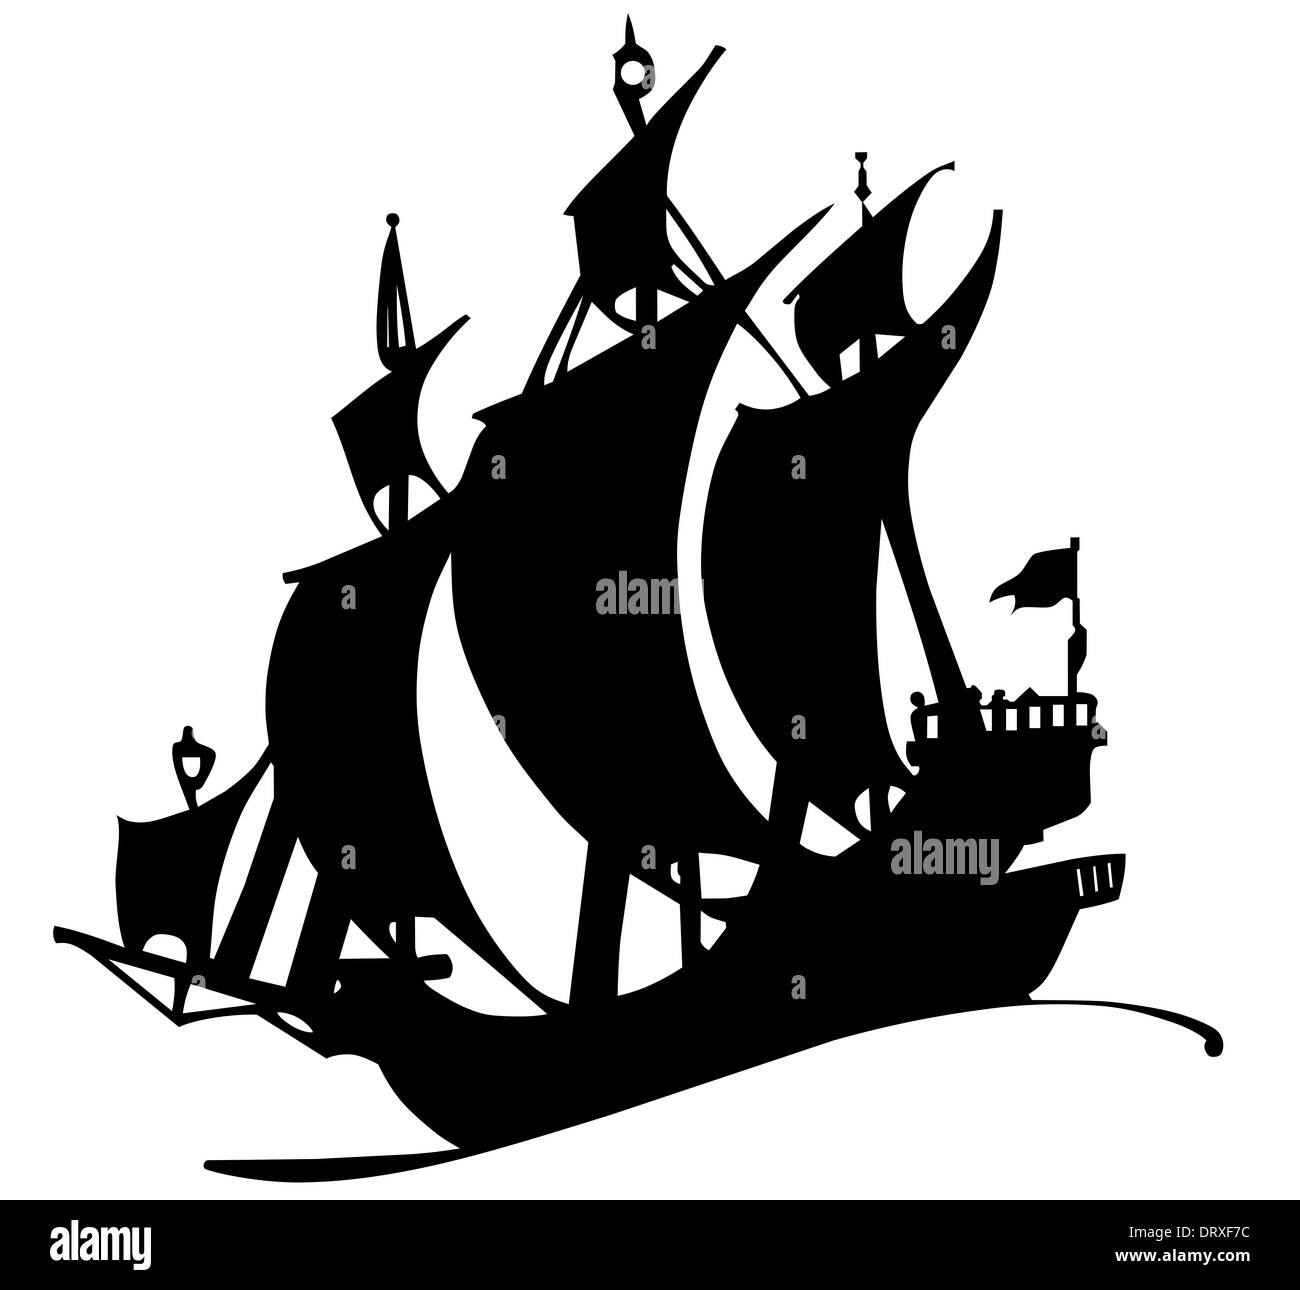 Illustration of ship floating on the waves on the sails. Stock Photo